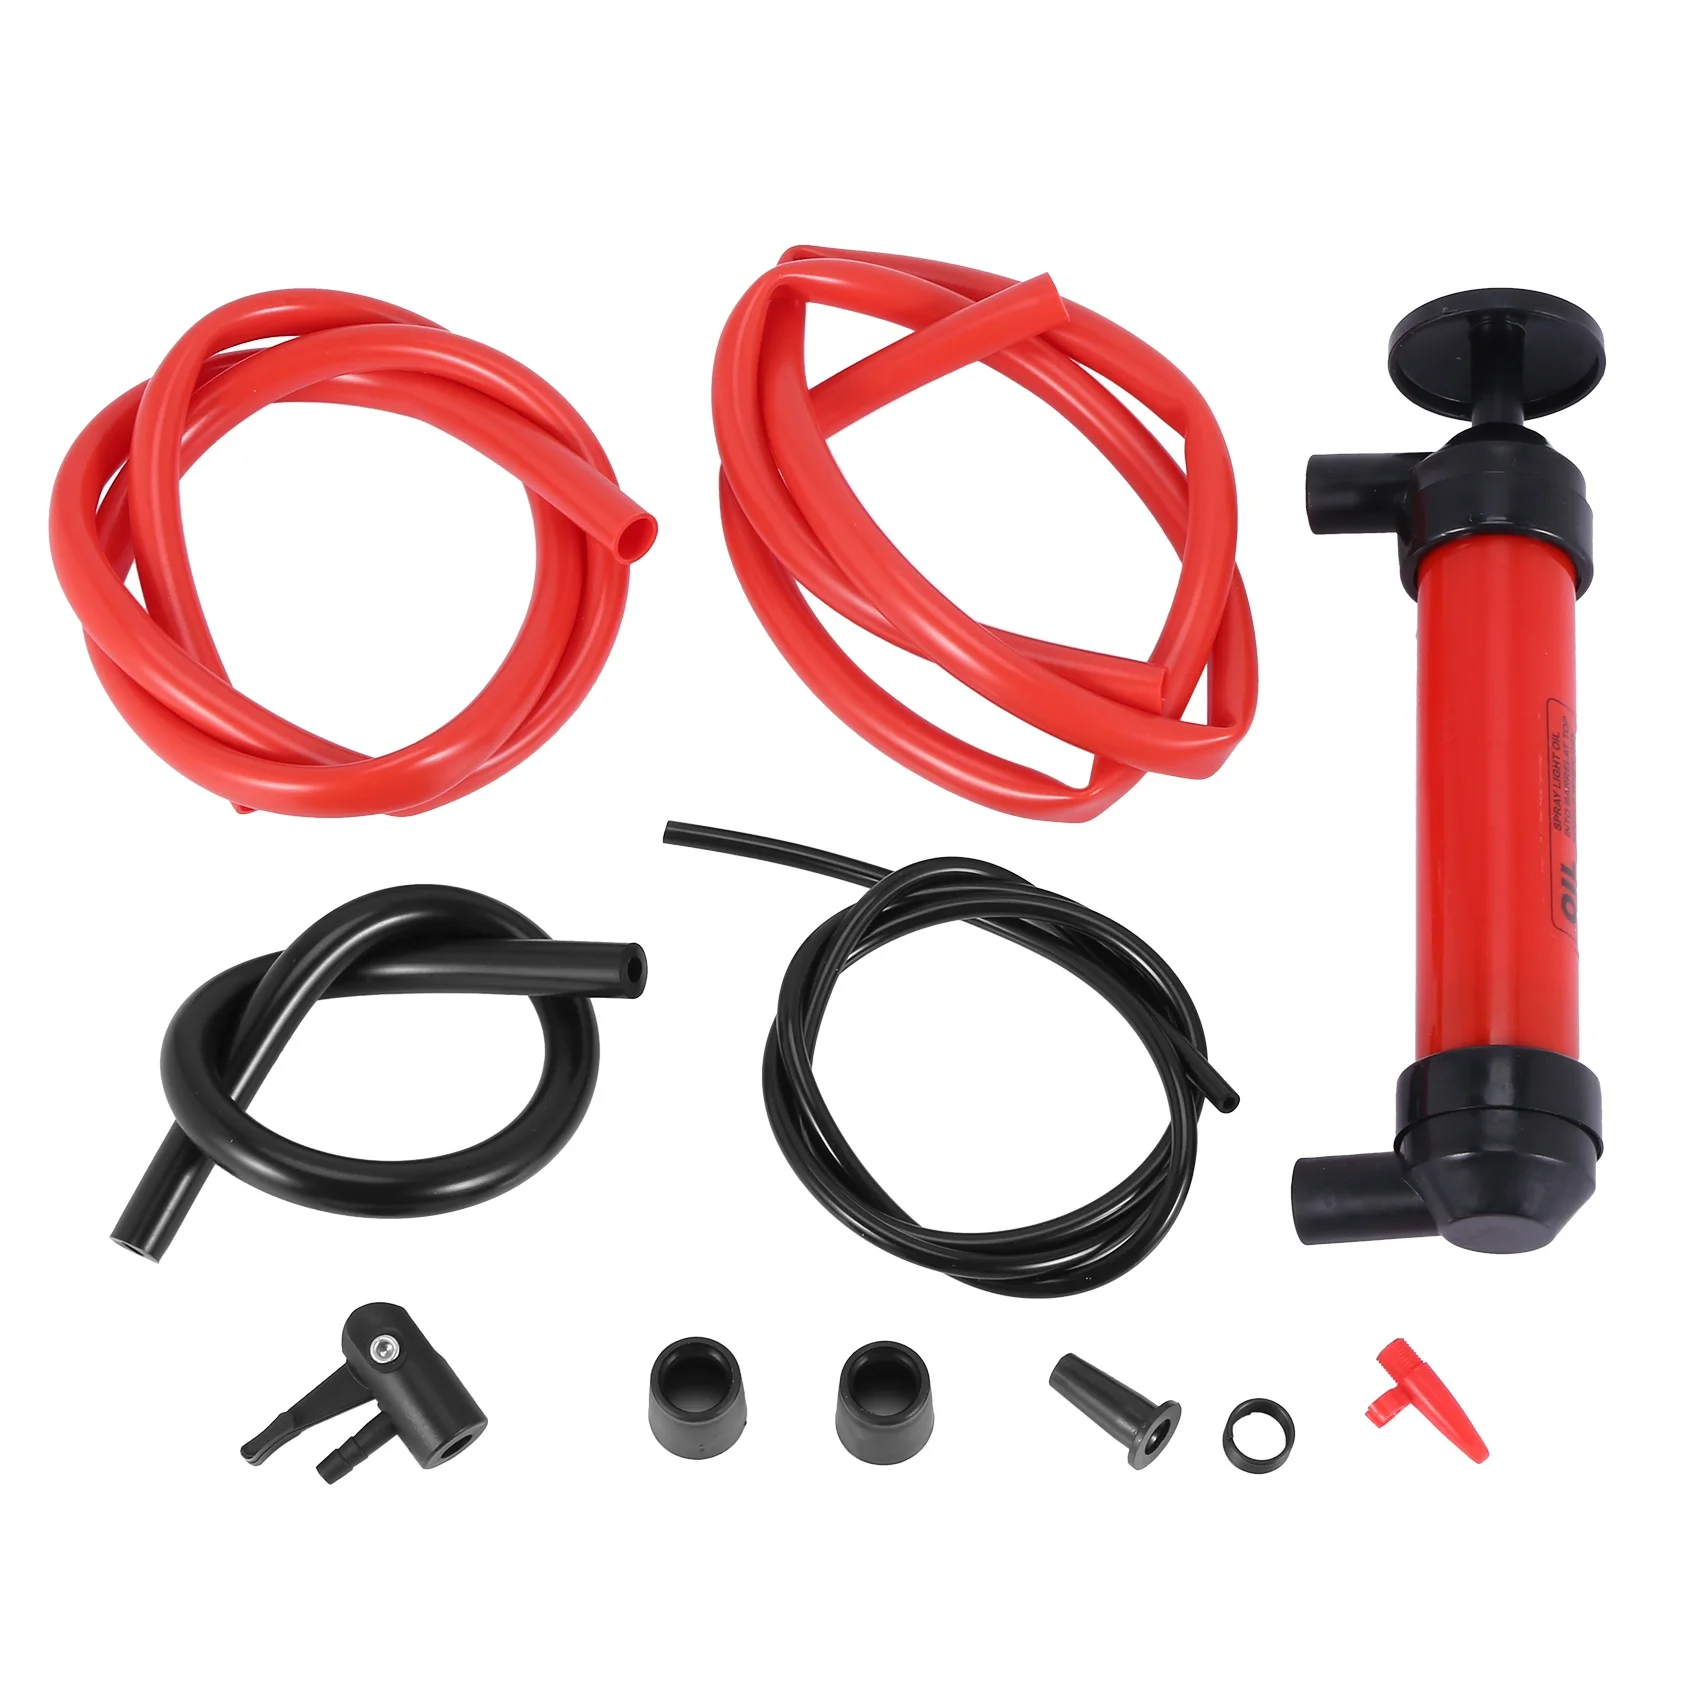 

Multi- Siphon Transfer Pump Kit, with Tube | Fluid Fuel Extractor Suction Tool for Oil, Gasoline, Water, Liquids & Air